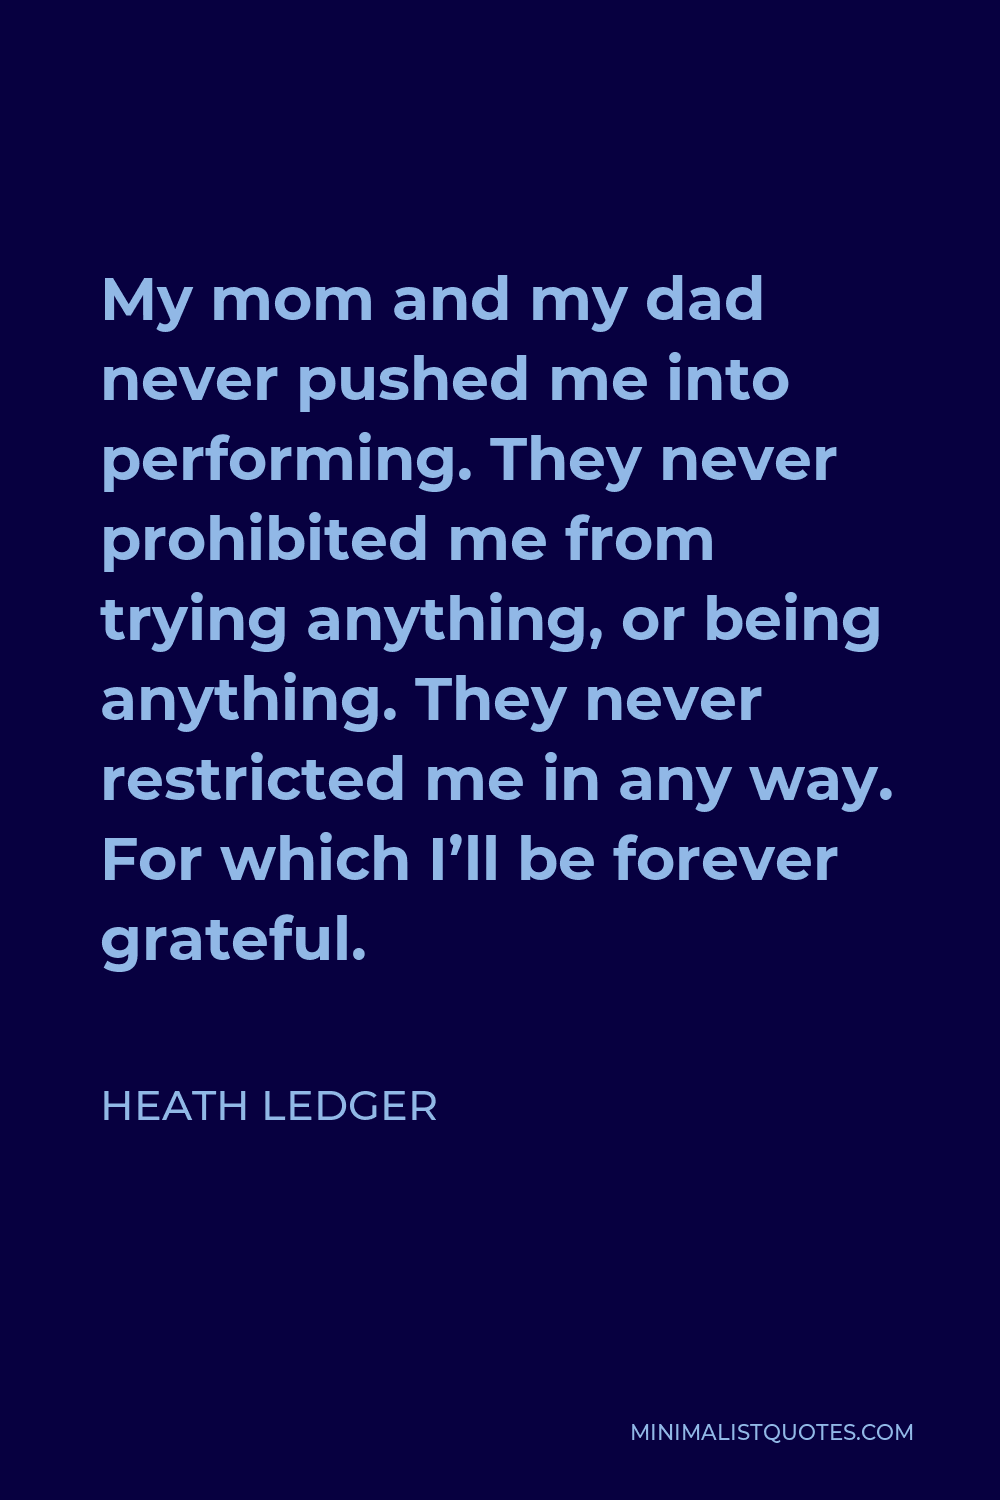 Heath Ledger Quote - My mom and my dad never pushed me into performing. They never prohibited me from trying anything, or being anything. They never restricted me in any way. For which I’ll be forever grateful.